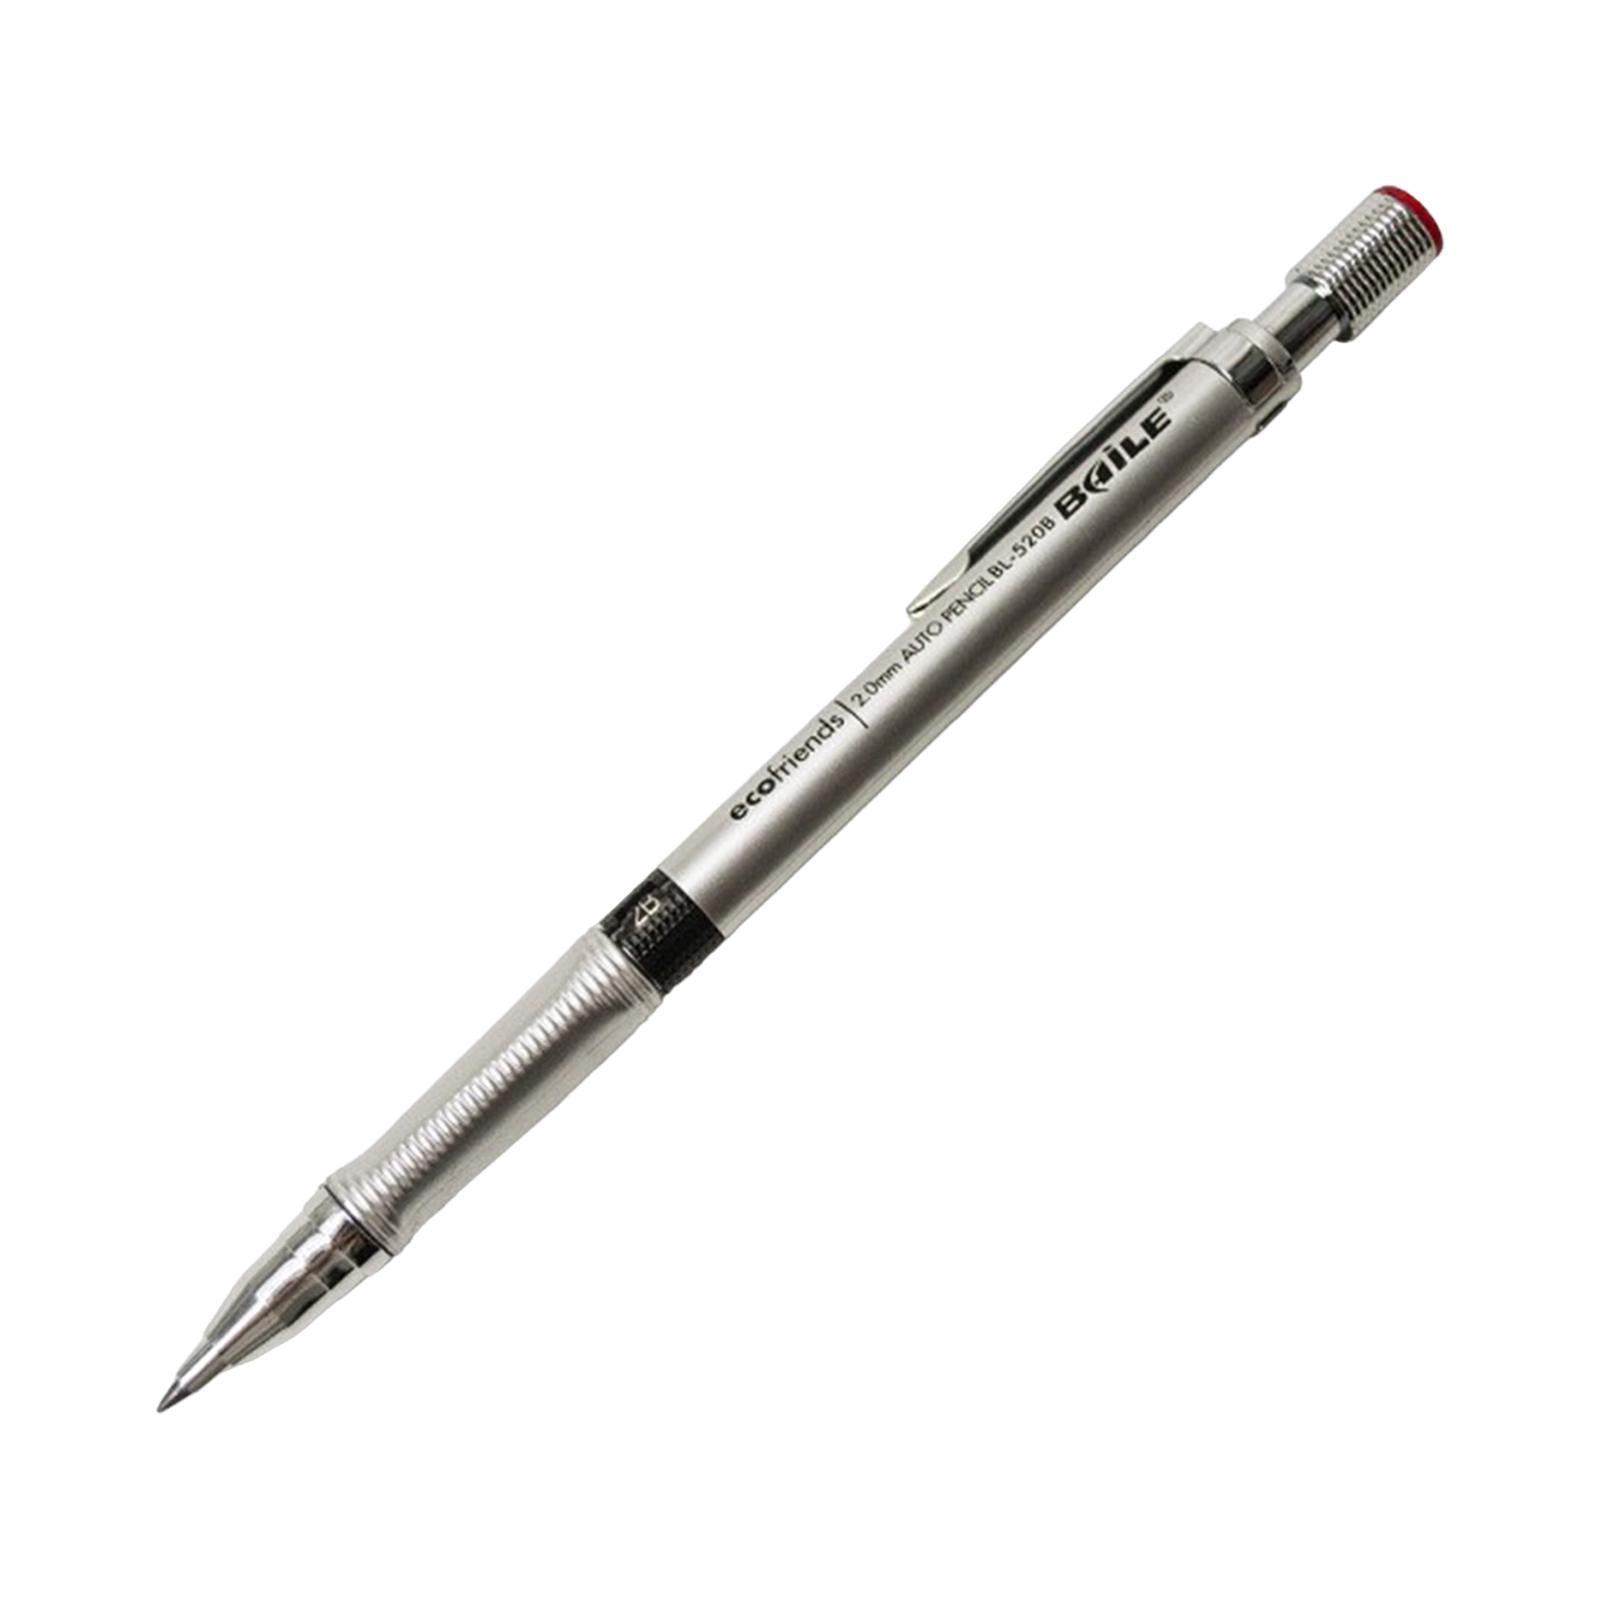 Art Painting Pencils Portable Drafting Pencil for Drafting Writing Sketching Silver